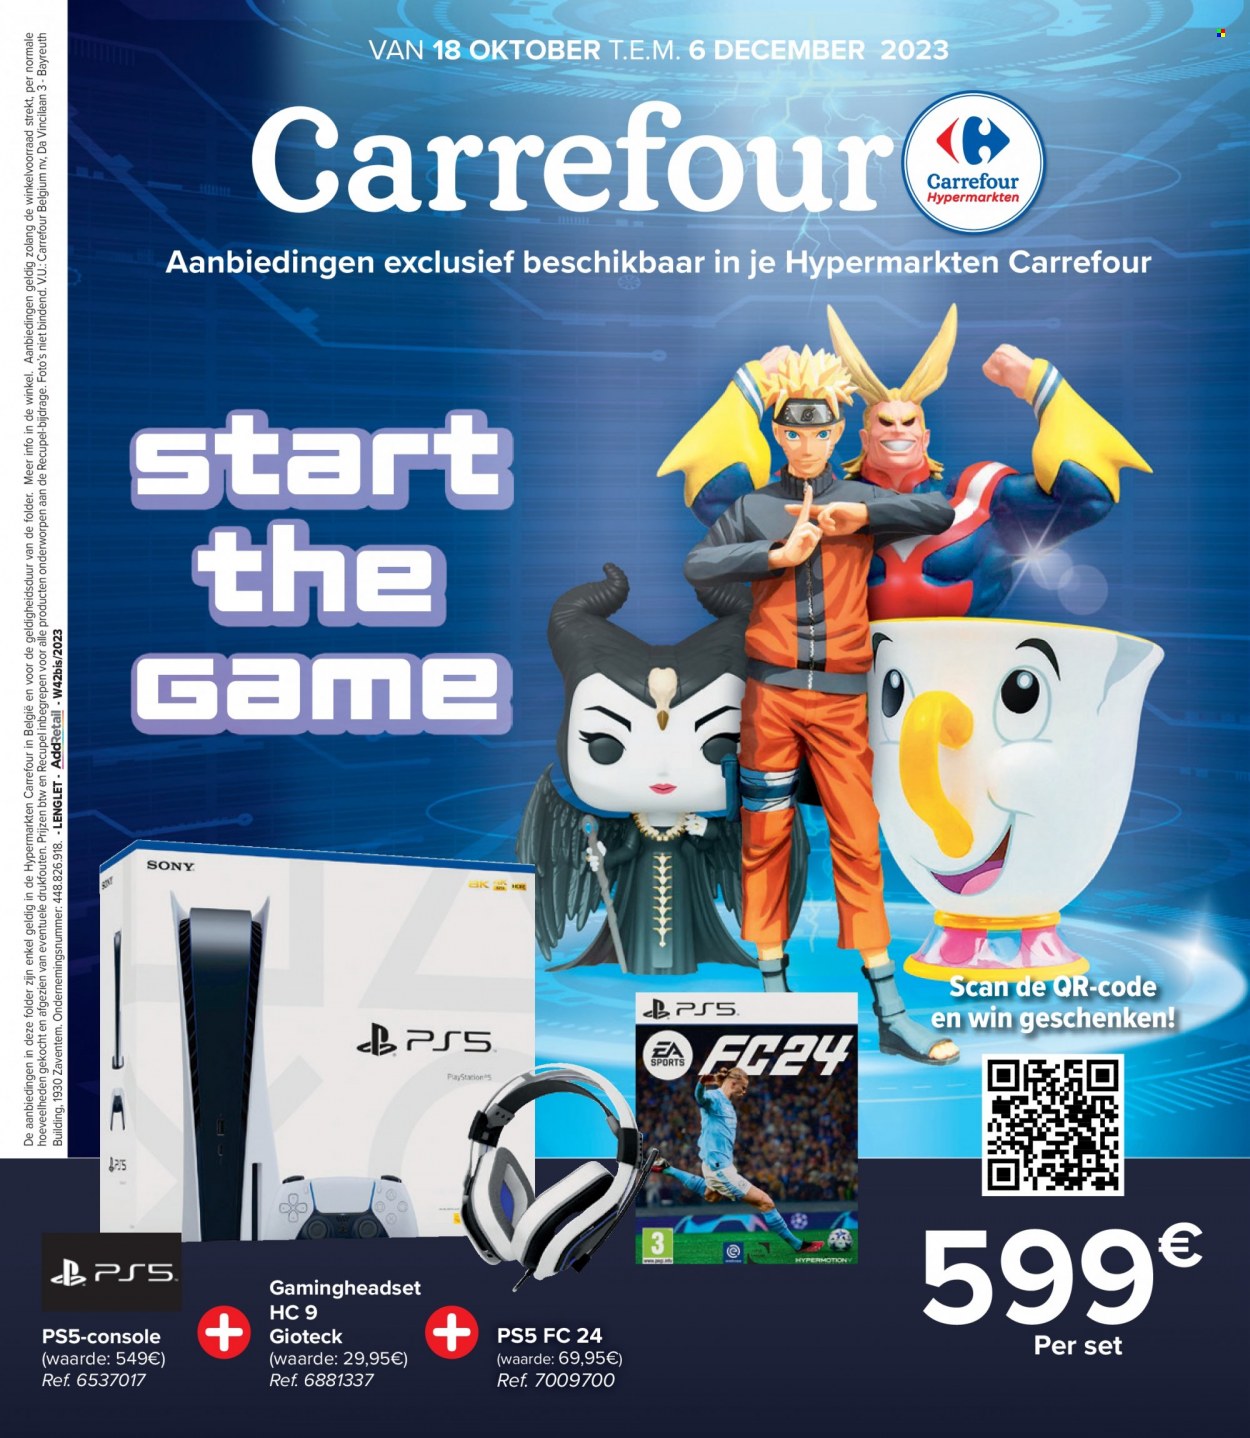 Catalogue Carrefour hypermarkt - 18.10.2023 - 6.12.2023. Page 1.